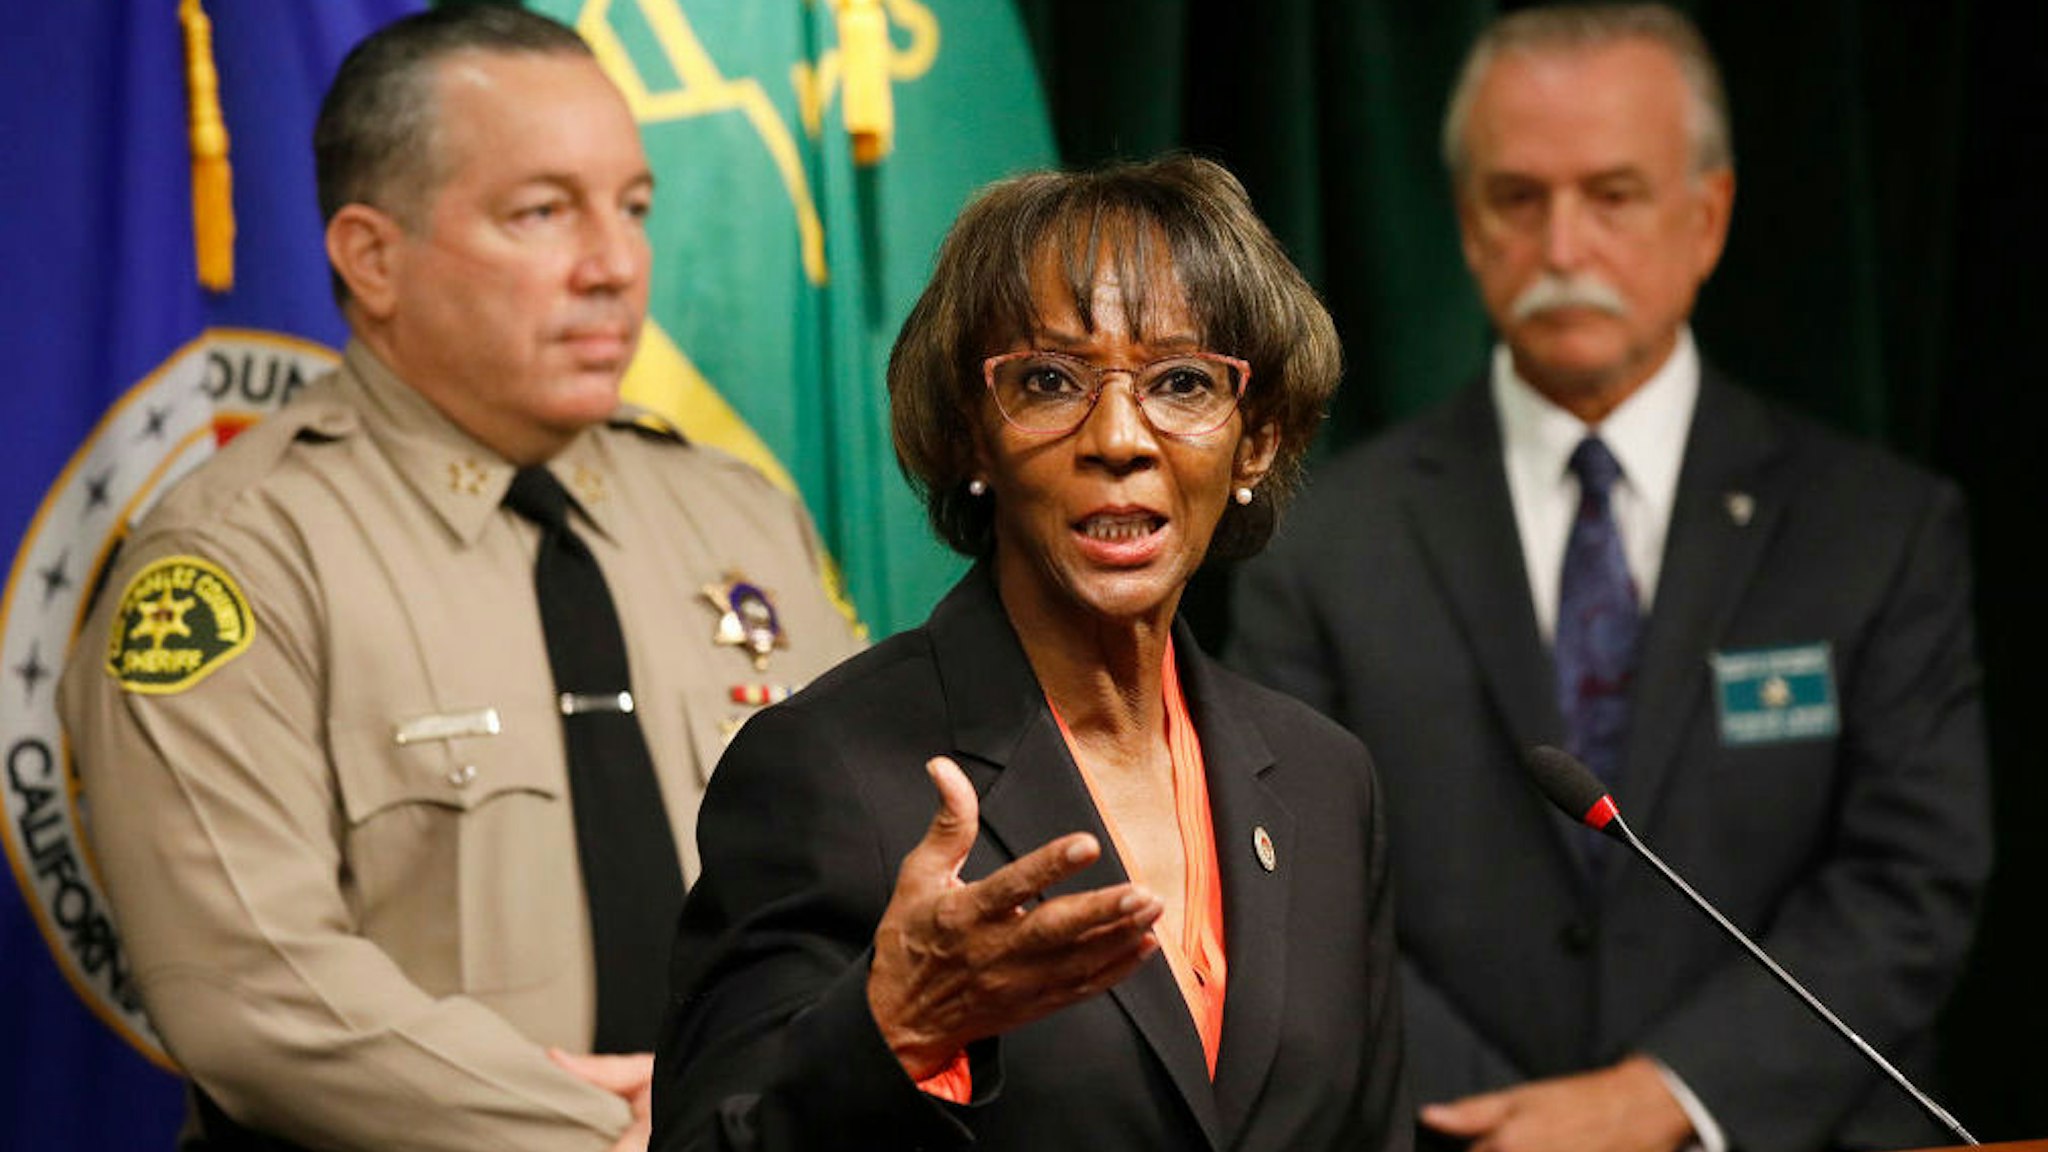 District Attorney Jackie Lacey, Los Angeles County Sheriff Alex Villanueva, left, and Homicide Bureau Captain Kent A. Wegener, right, announce an arrest of Deonte Lee Murray in the ambush shooting of two on-duty deputies who were sitting in their marked patrol car at the Metro Blue Line station in Compton September 12, 2020. Hall Of Justice on Wednesday, Sept. 30, 2020 in Los Angeles, CA. (Al Seib / Los Angeles Times